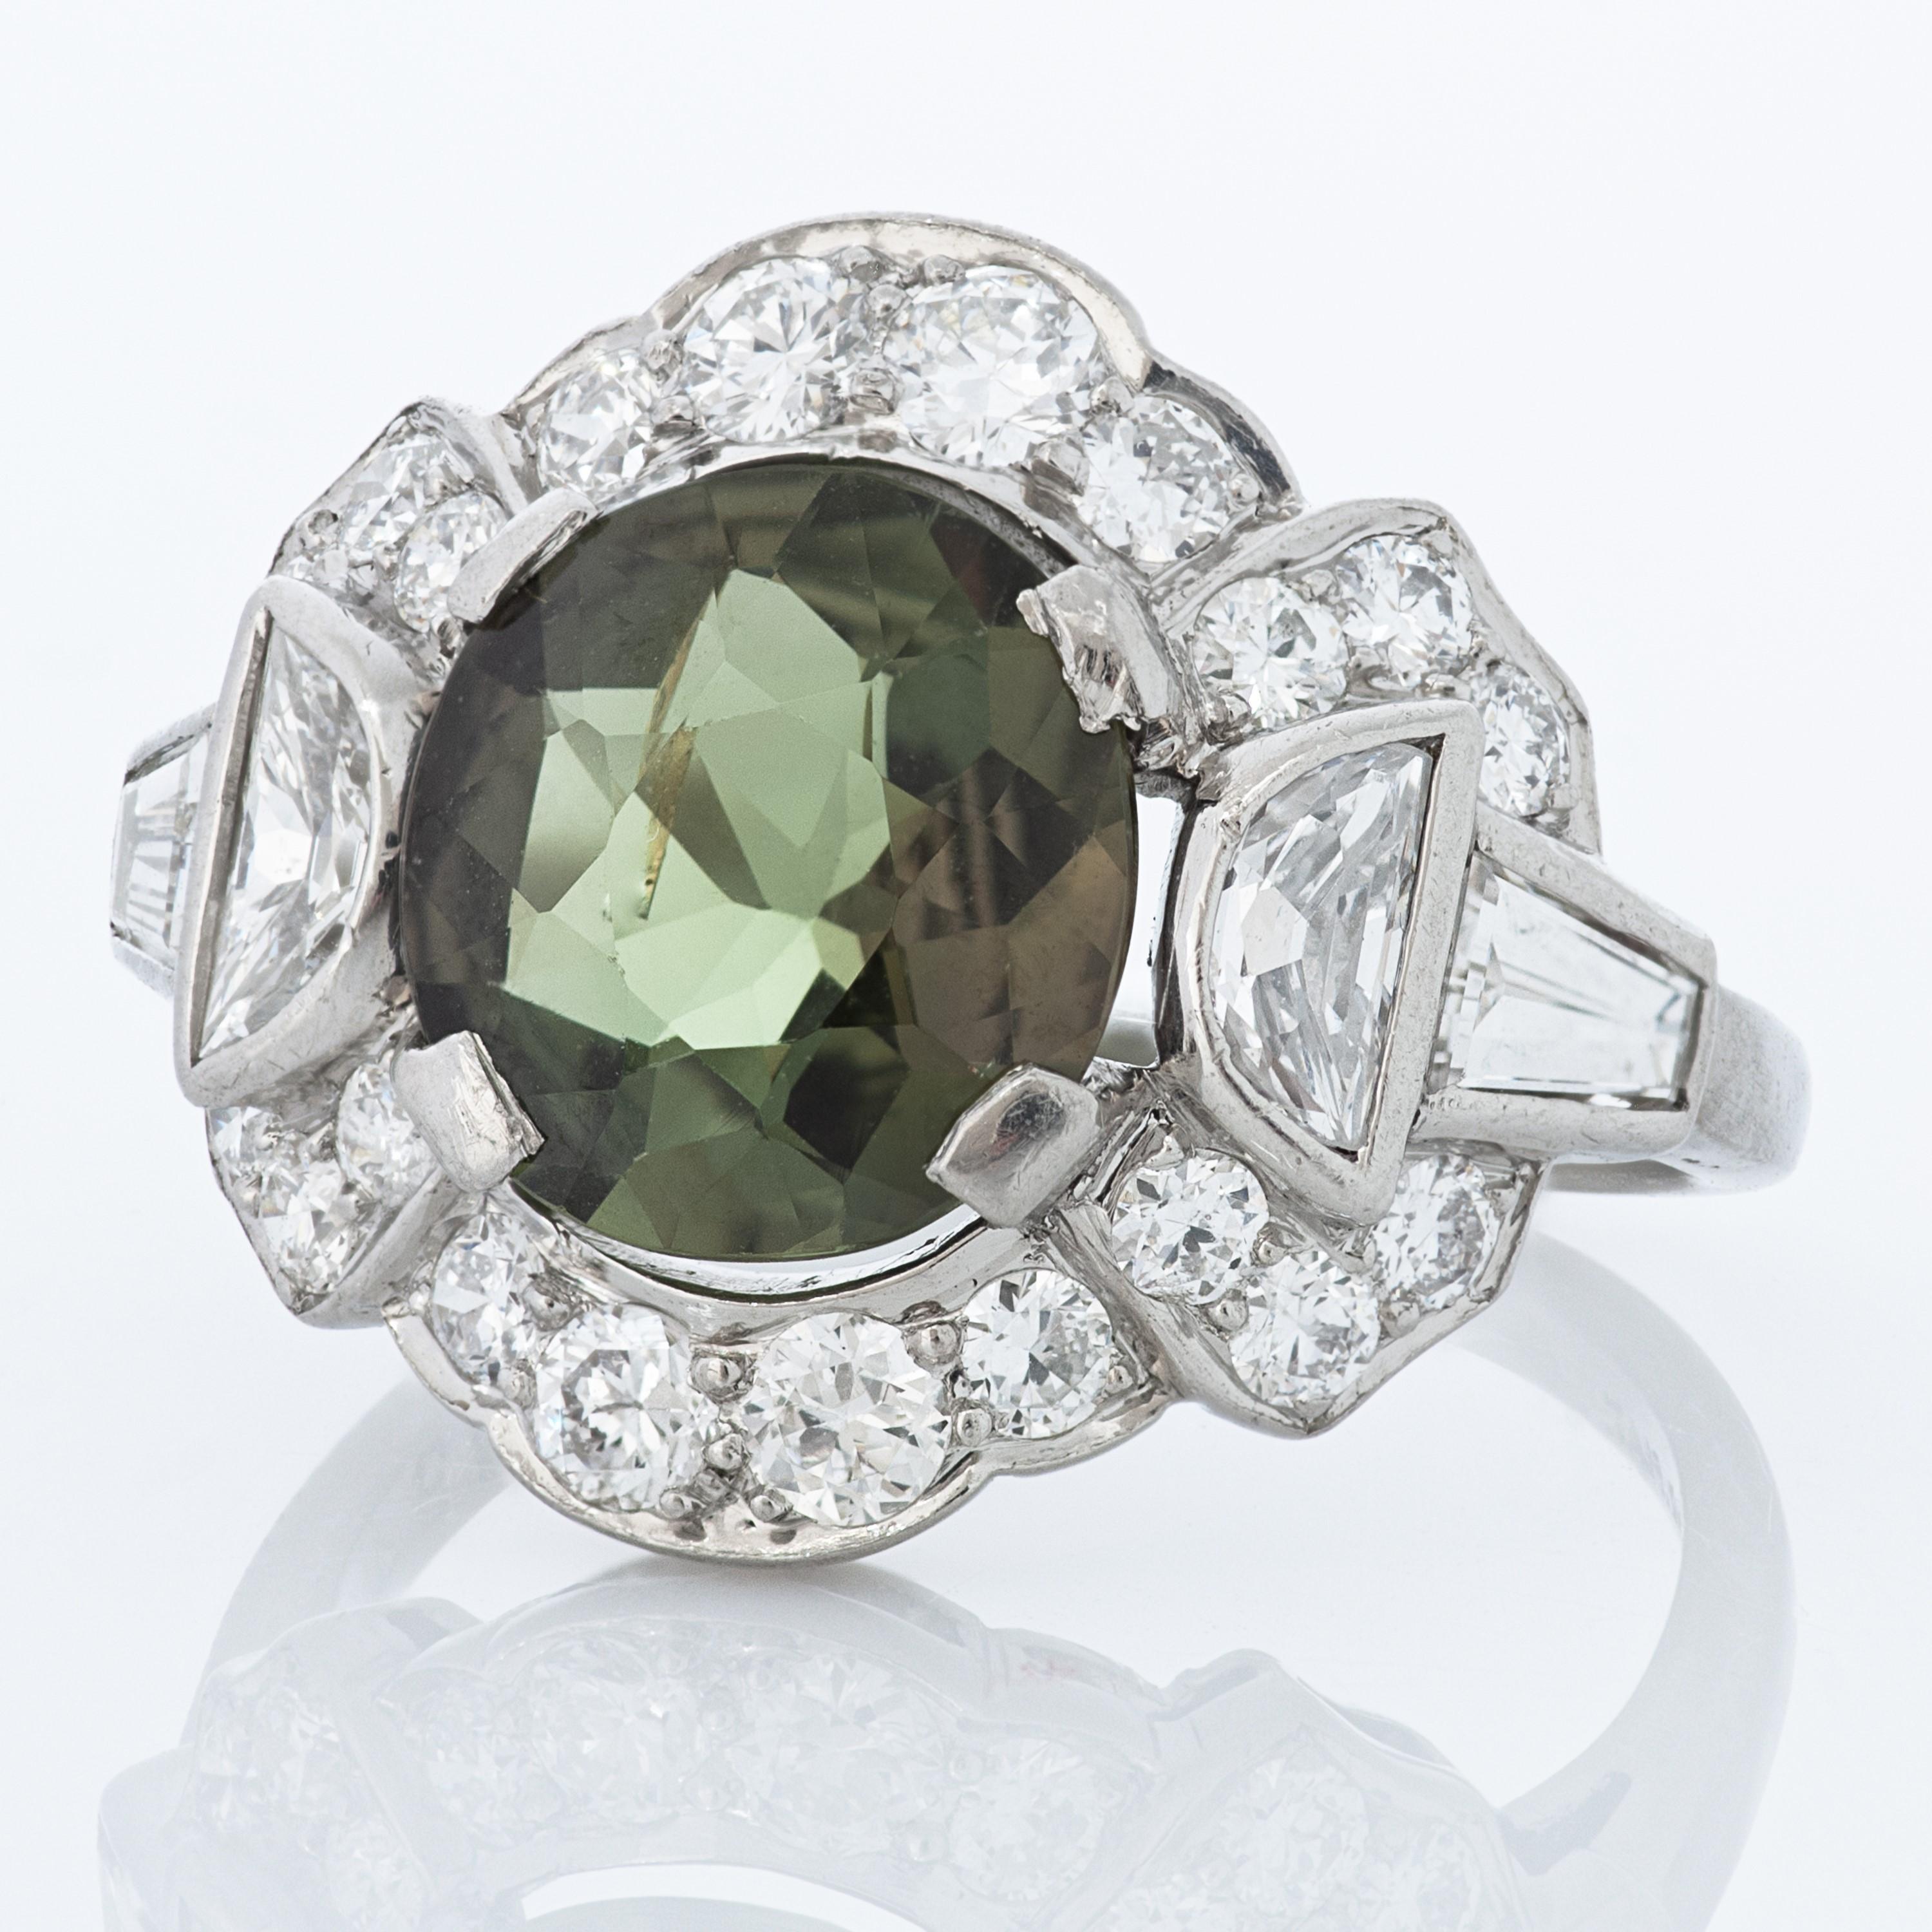 J.E. Caldwell & Co. Art Deco alexandrite and diamond platinum ring.

This J.E. Caldwell ring features a cushion cut alexandrite weighing 1.87 carats, accompanied by an AGL brief report.  The Alexandrite is surrounded by 2 half moon shaped diamonds